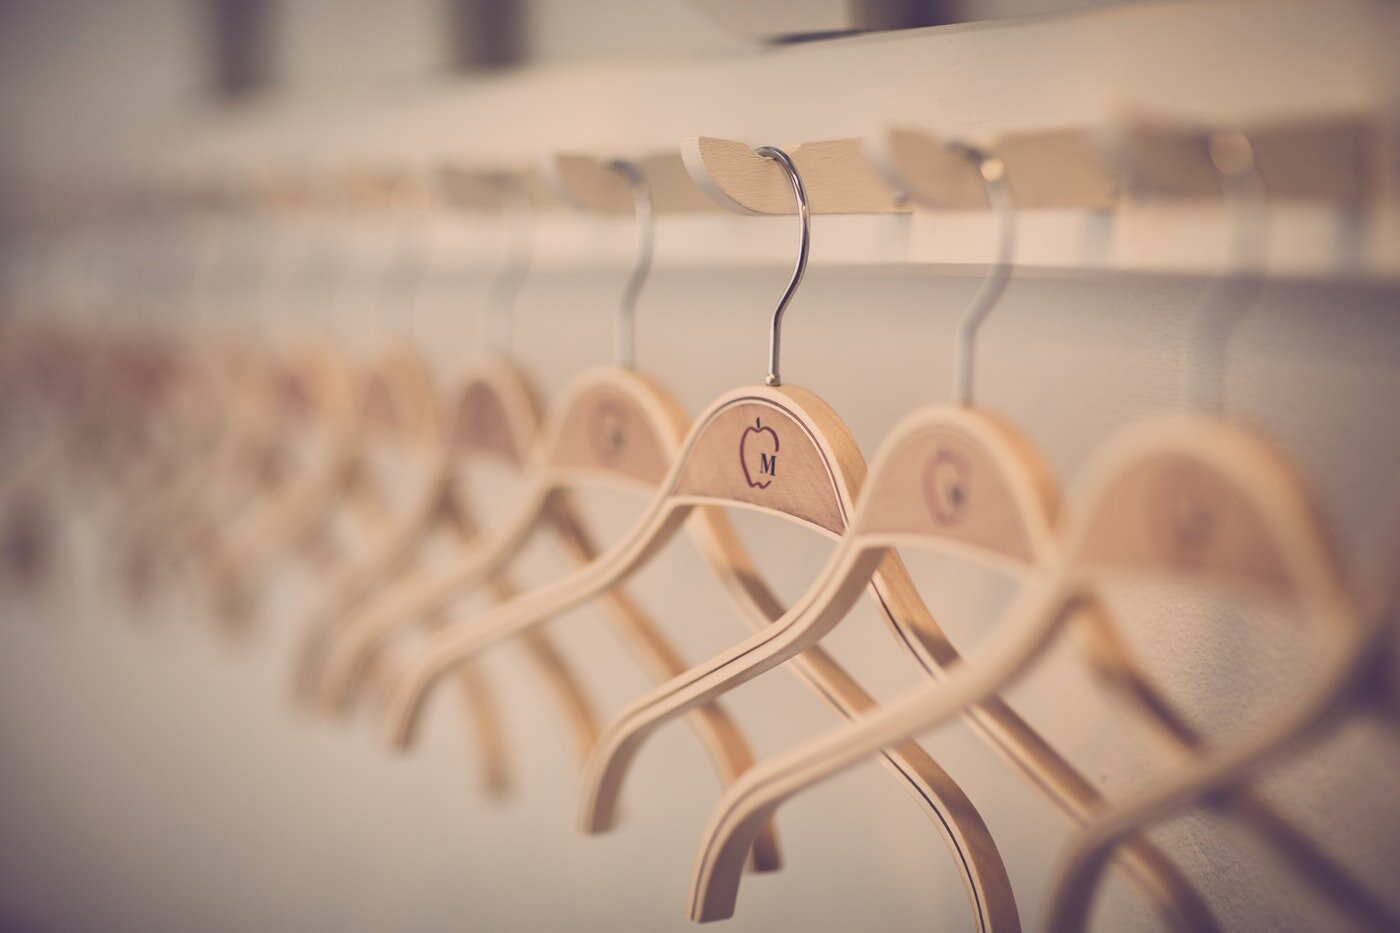 Organized row of hangers - simple decluttering tips that are effective and eco-friendly